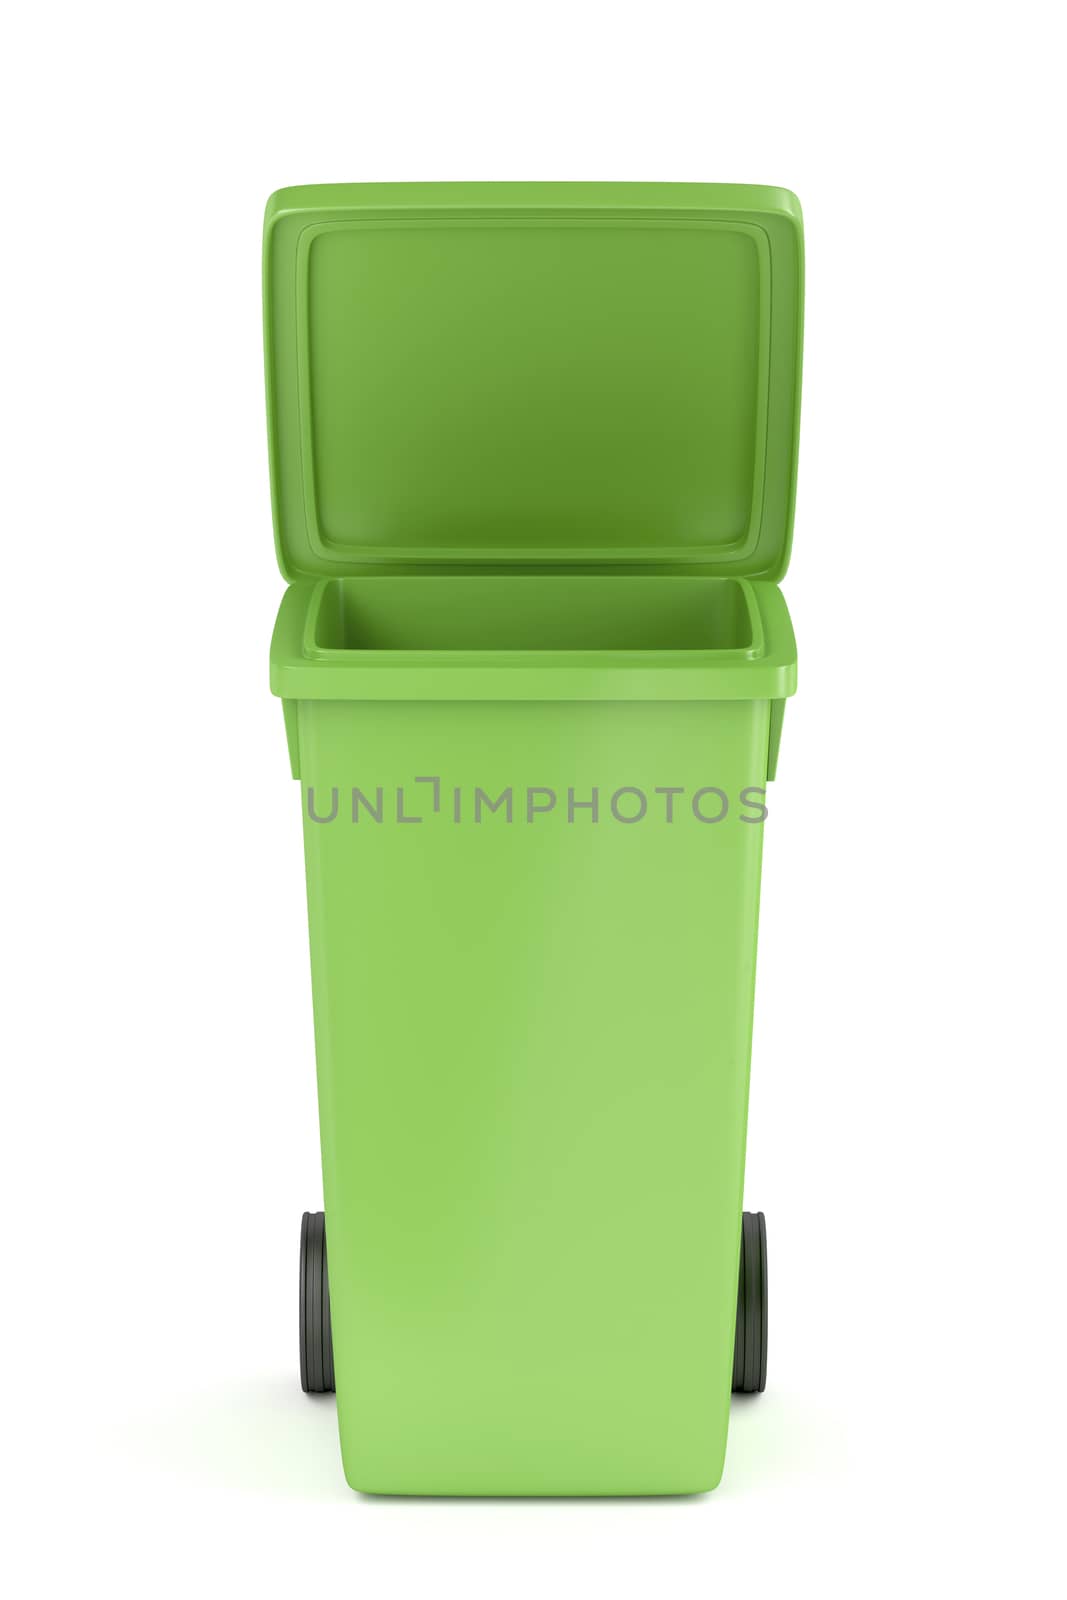 Green recycle bin on white background